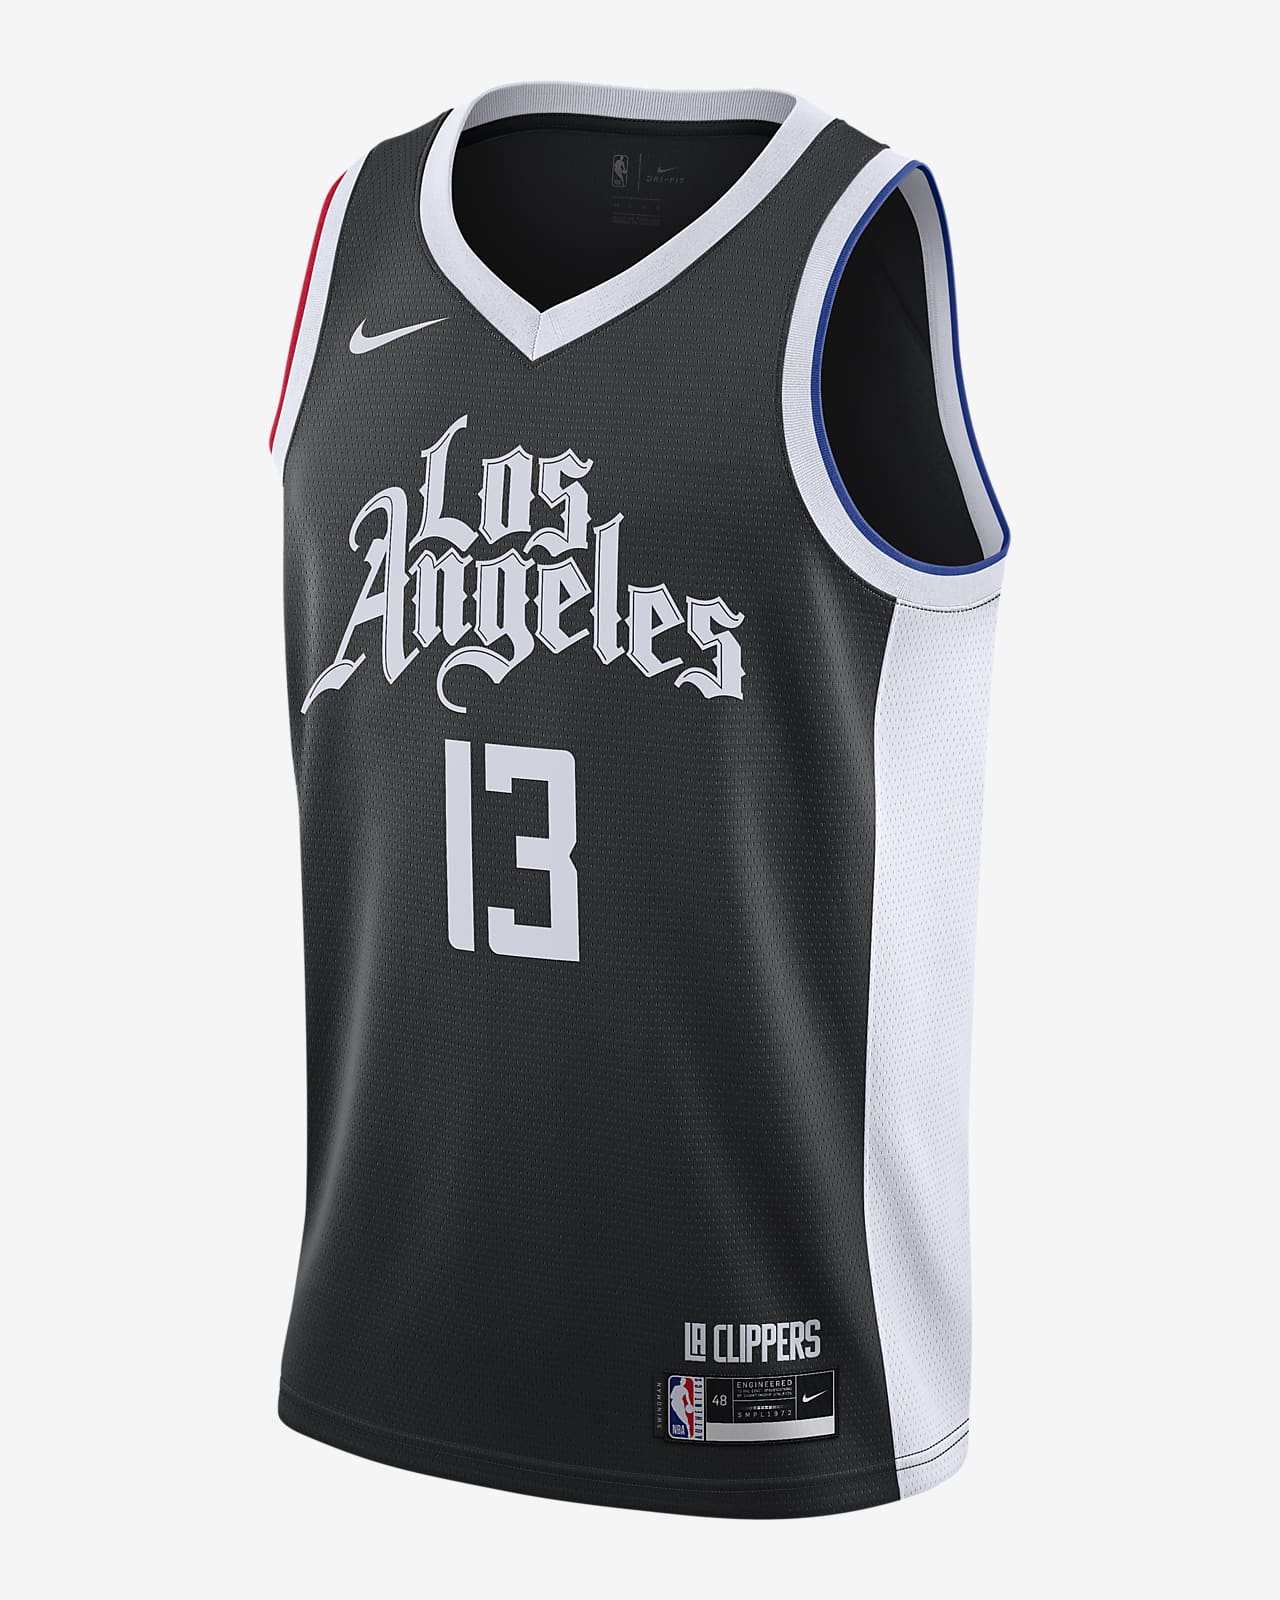 clippers city jersey for sale